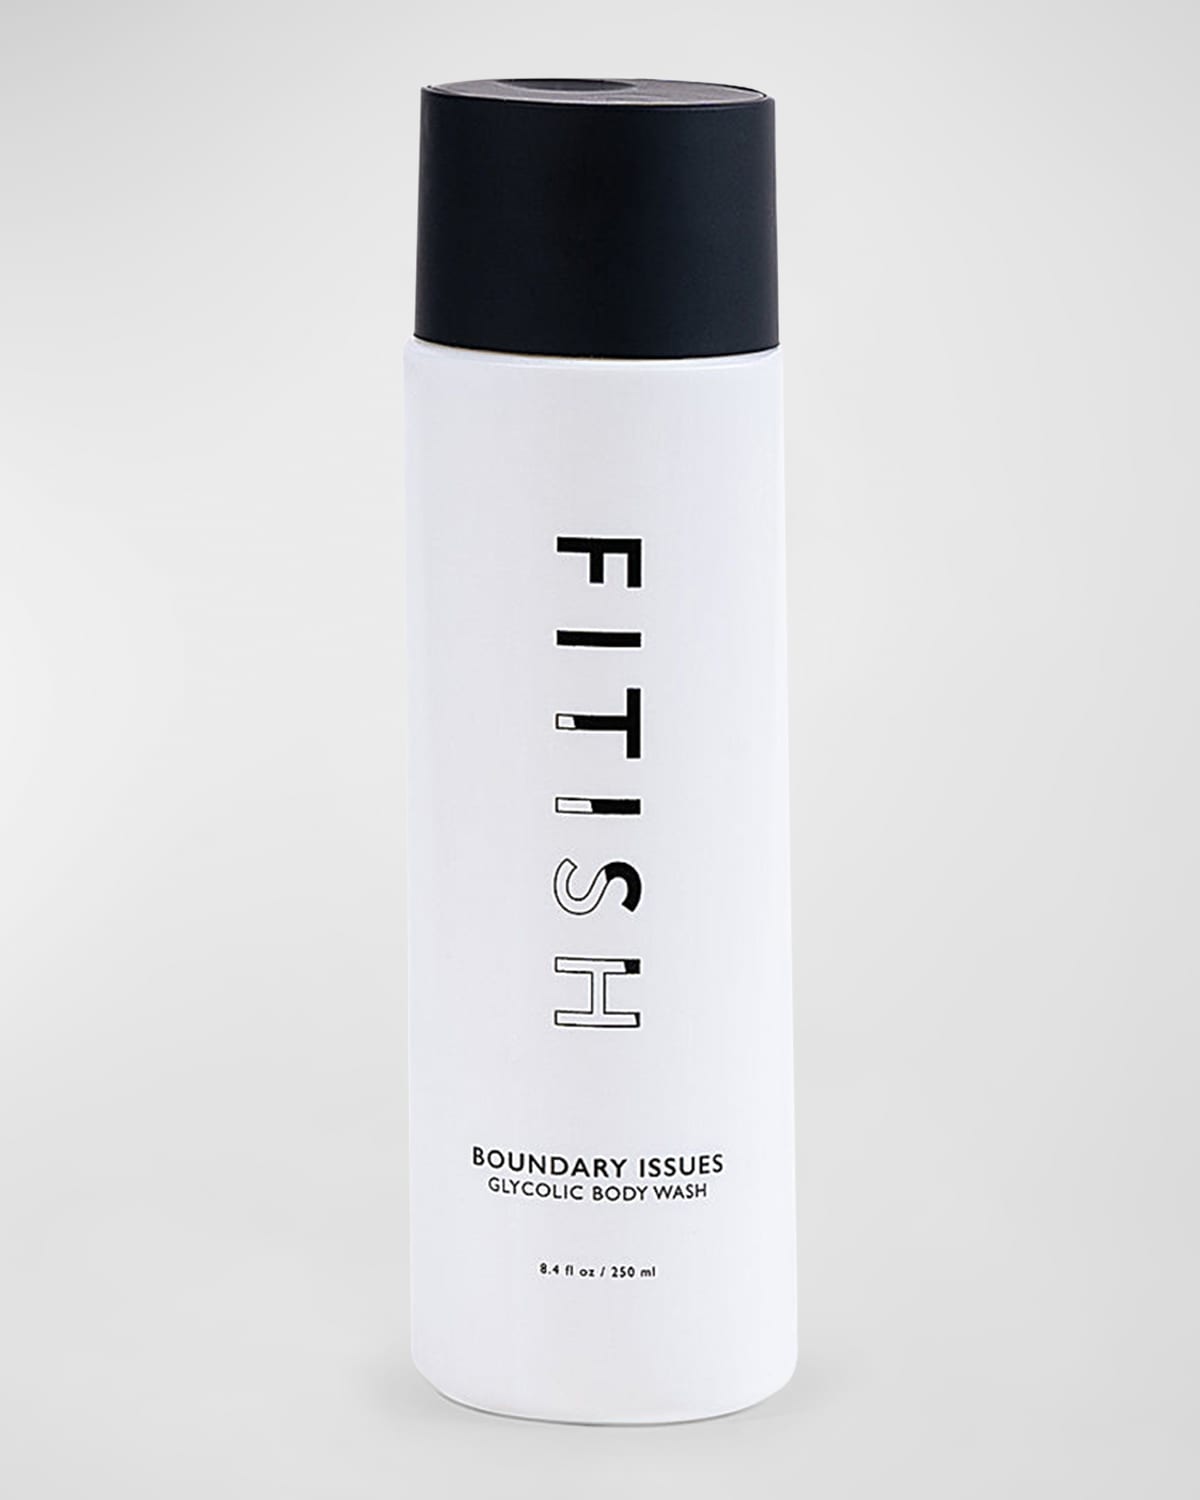 Fitish 8.4 oz. Boundary Issues Body Wash